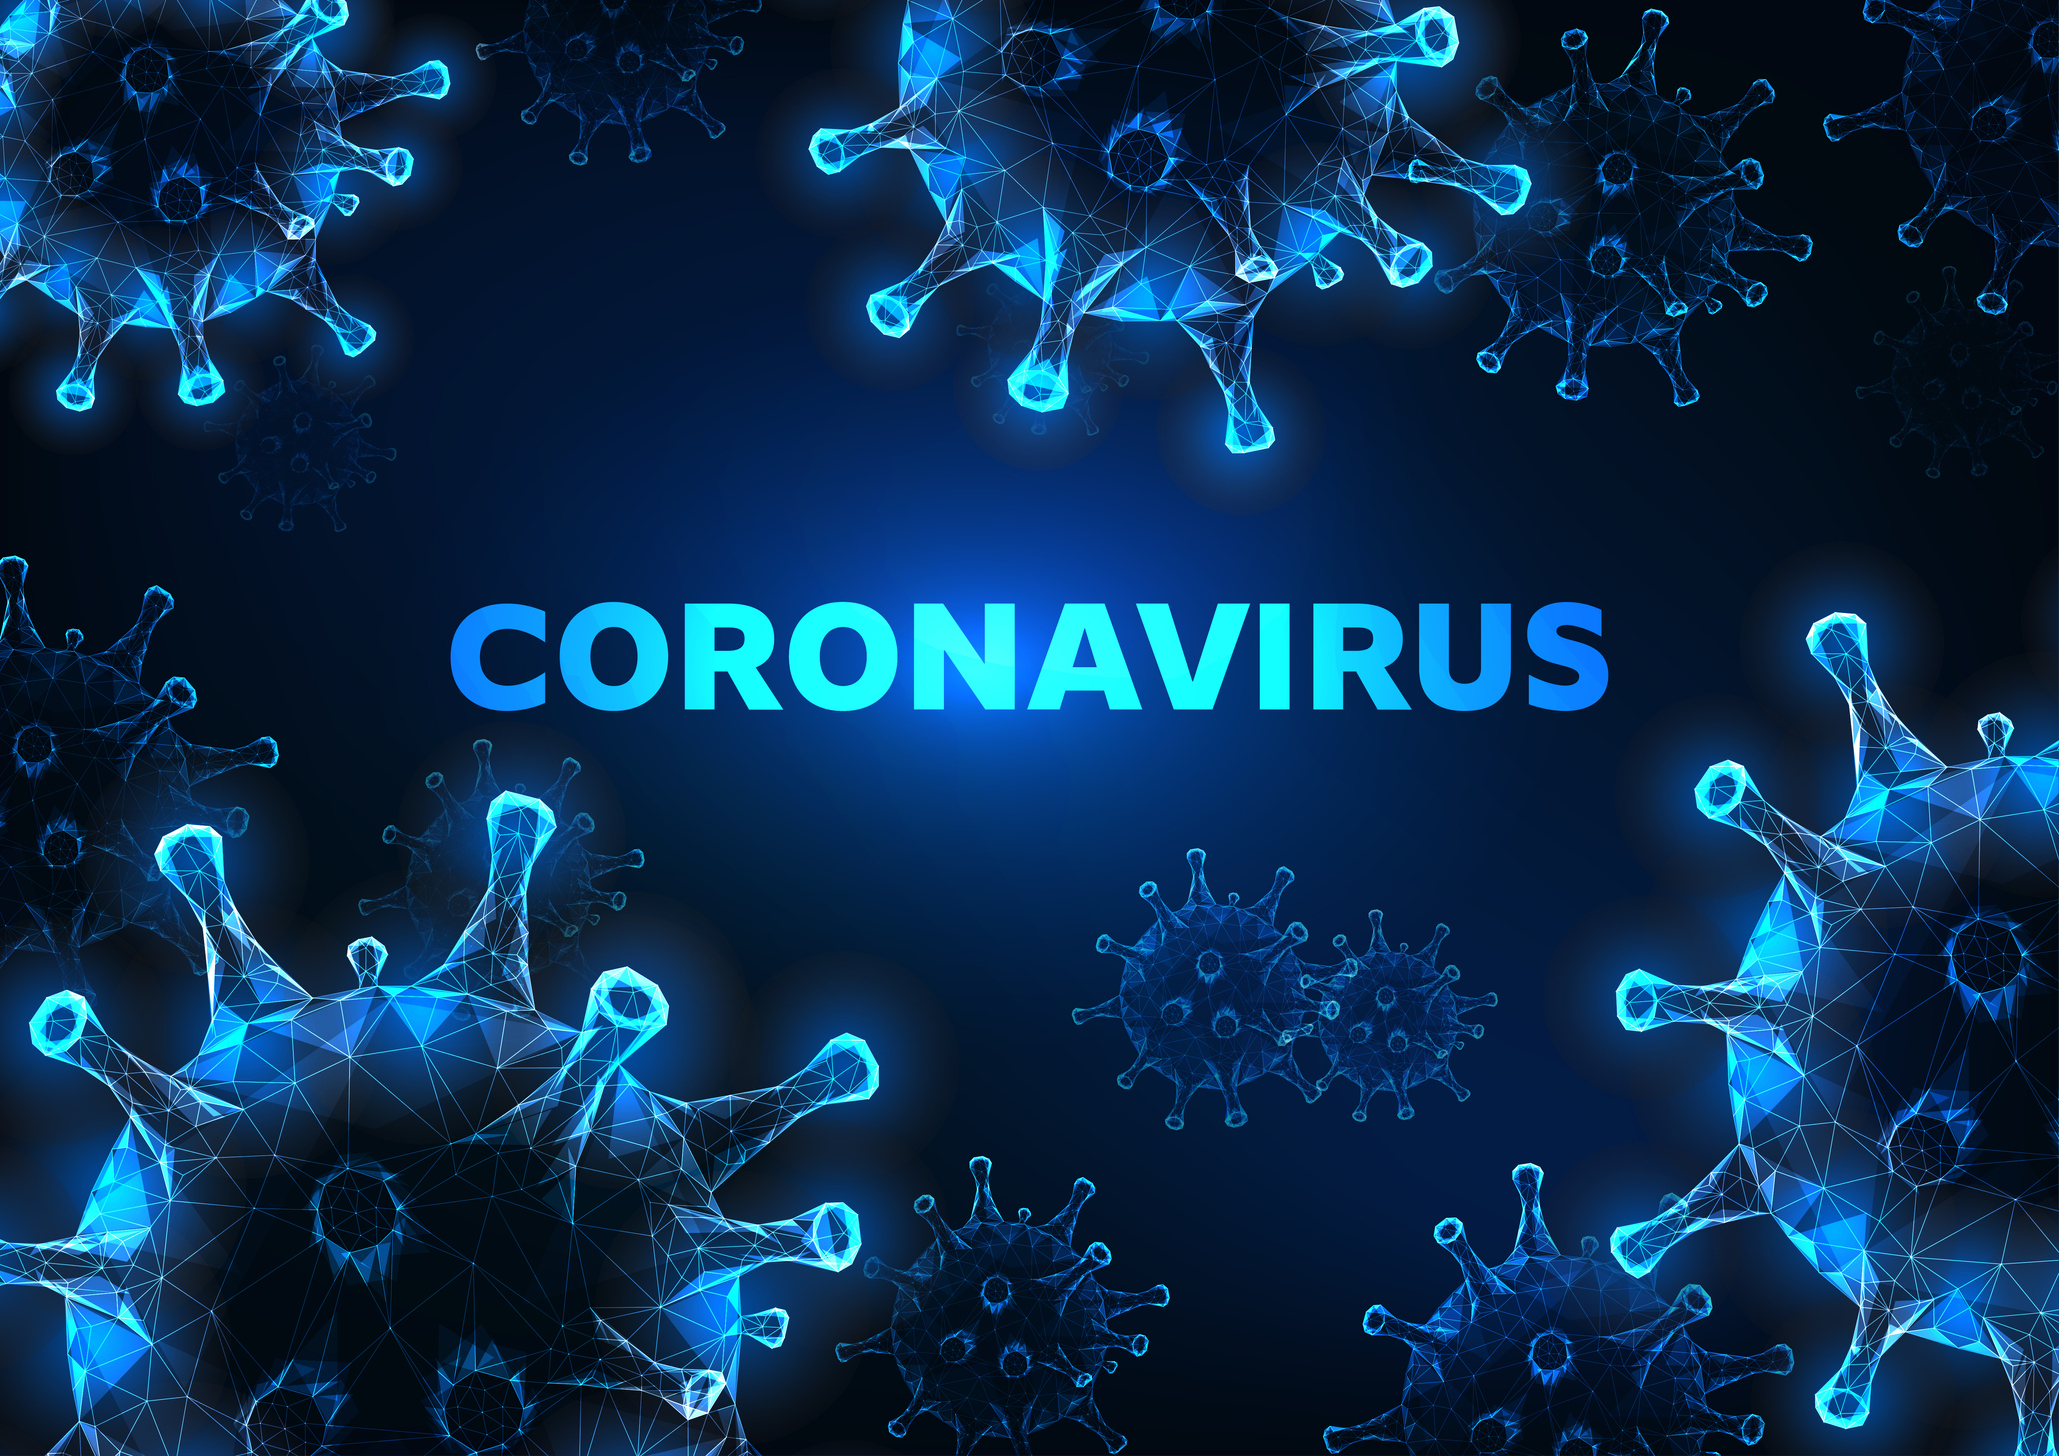 Futuristic coronavirus cells abstract background with glowing low polygonal virus cells and text on dark blue background. Immunology, virology, epidemiology concept. Vector illustration.